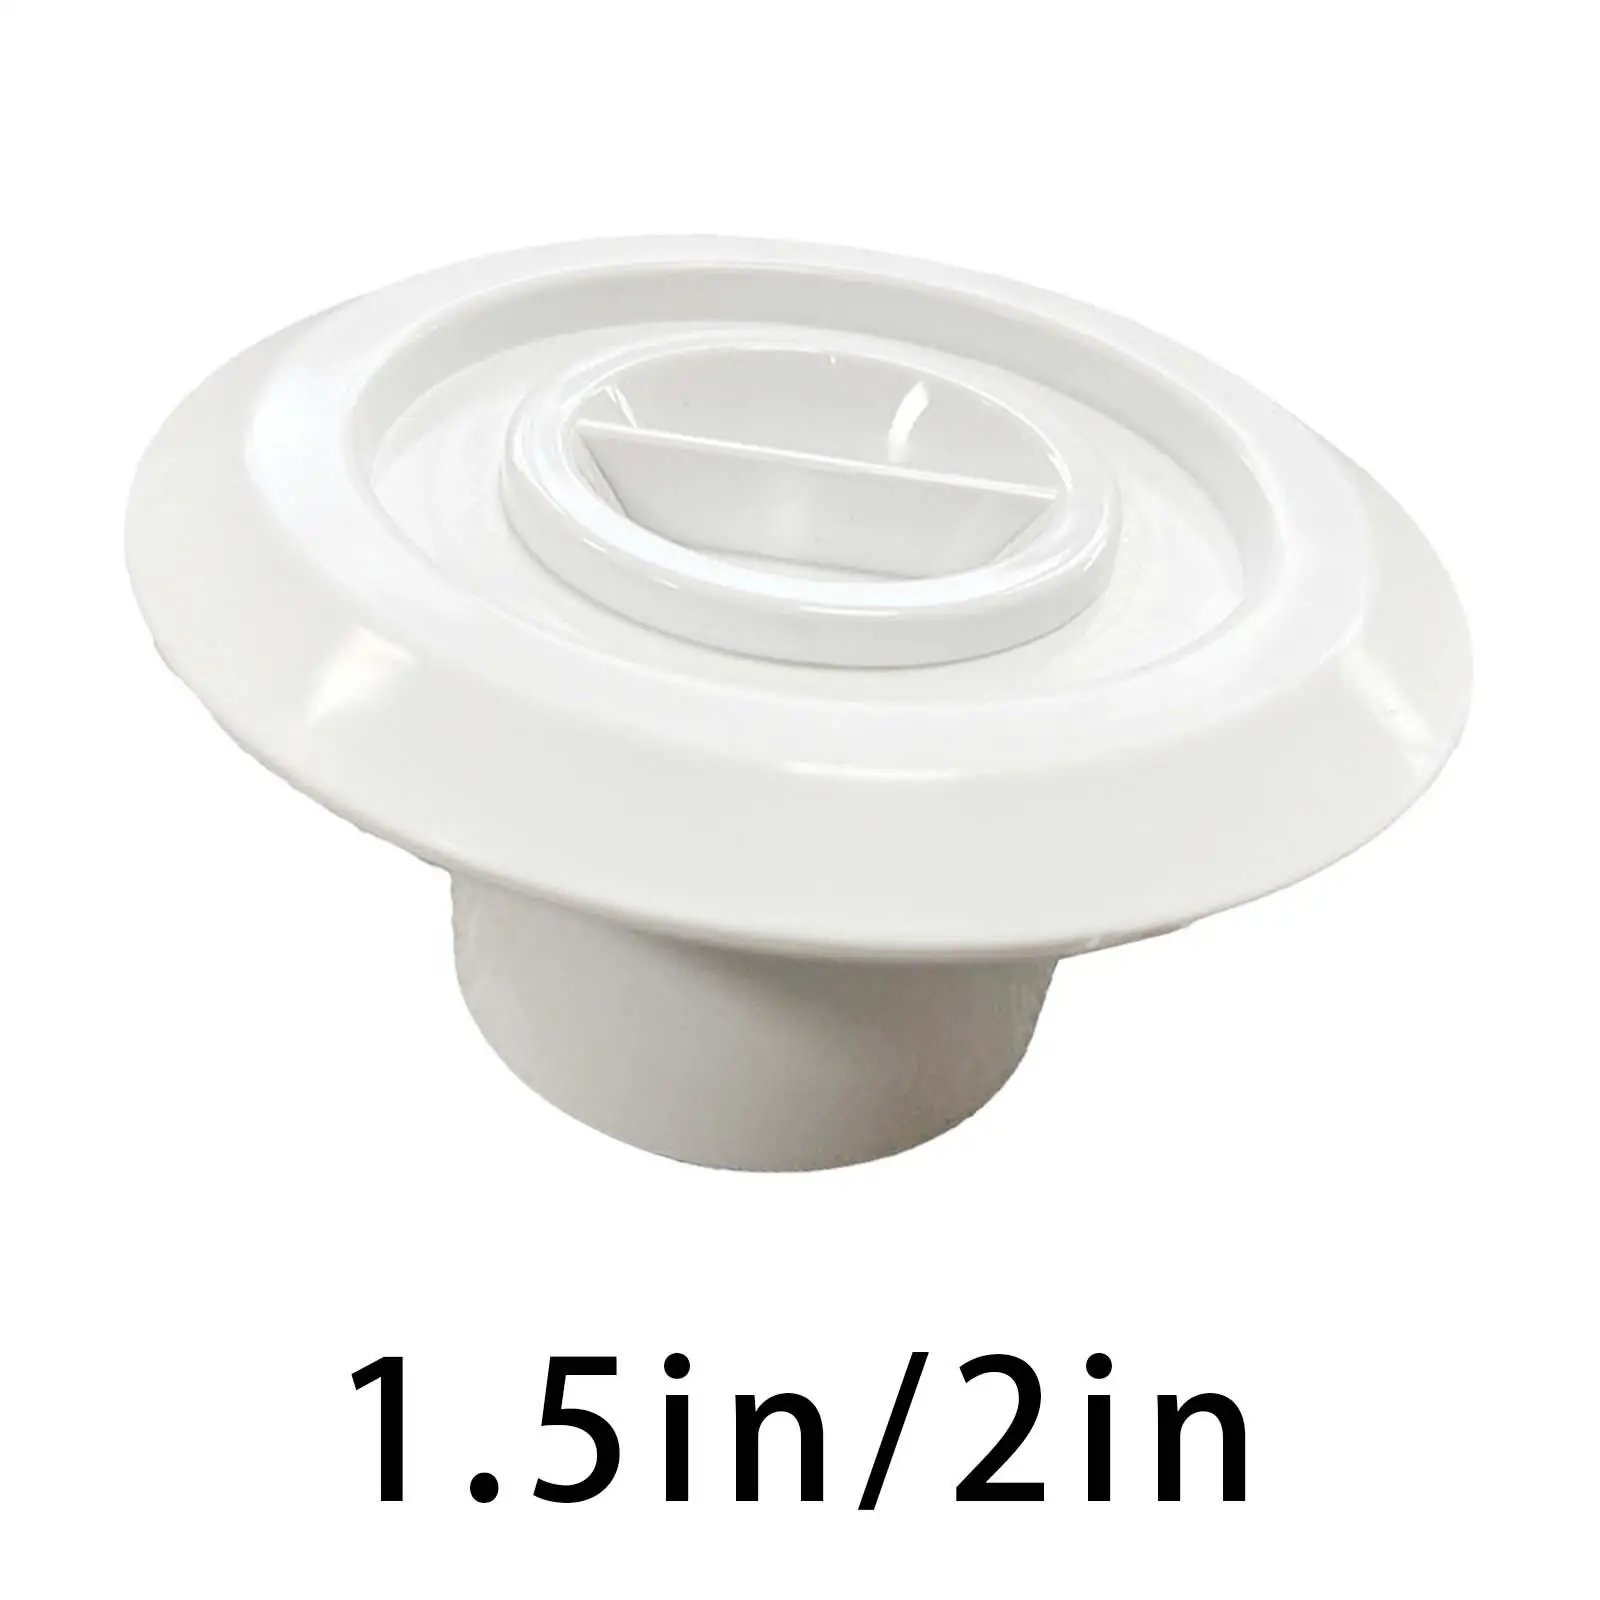 SPA Accessories Filter Lightweight Replacement Pool Drain Pools Floor Drain for SPA Cleaning Massage Pool Outdoor